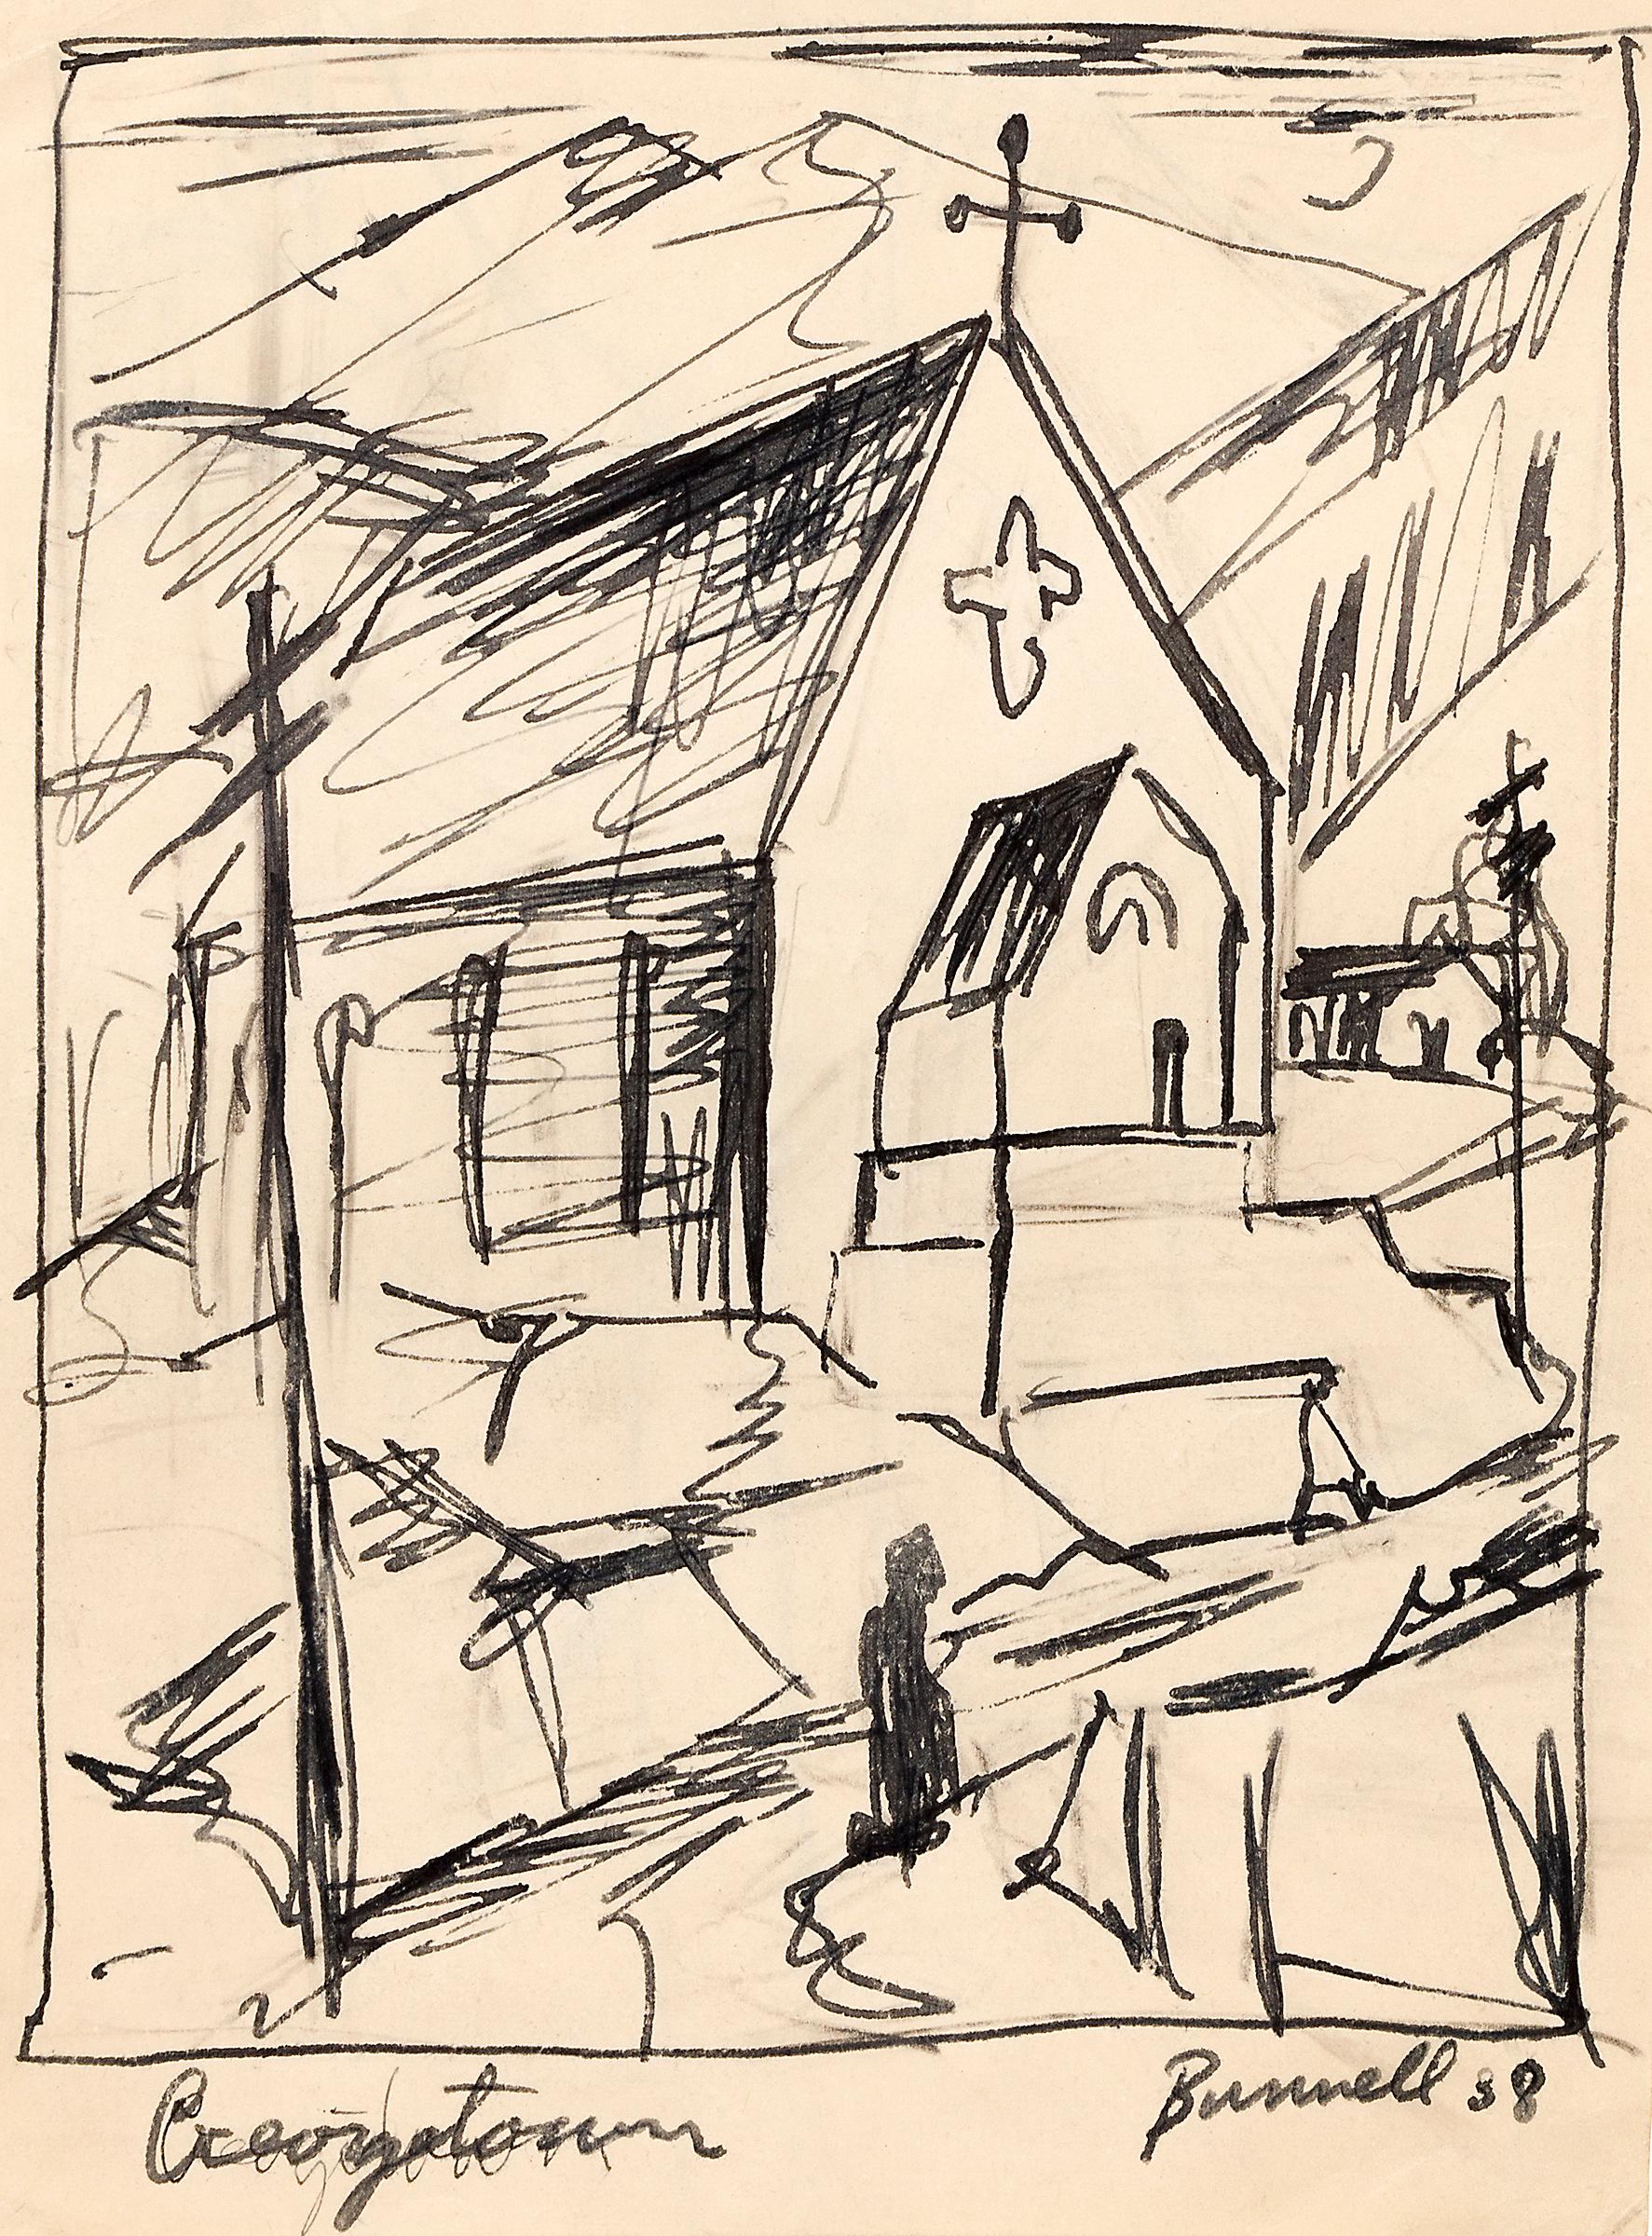 Georgetown (Church in the Mountains, Colorado), Modernist Landscape Ink Drawing - Art by Charles Ragland Bunnell